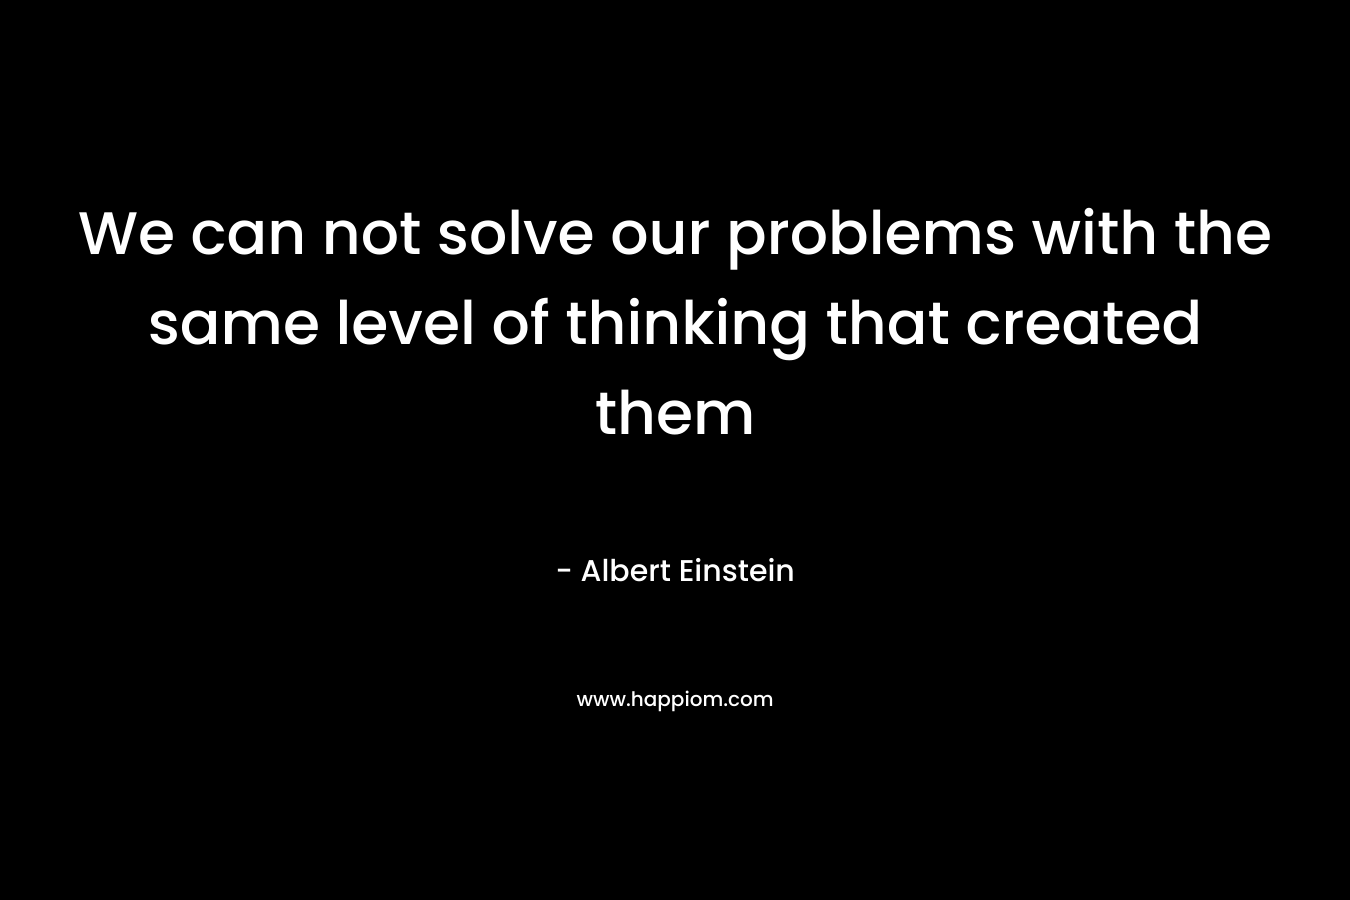 We can not solve our problems with the same level of thinking that created them